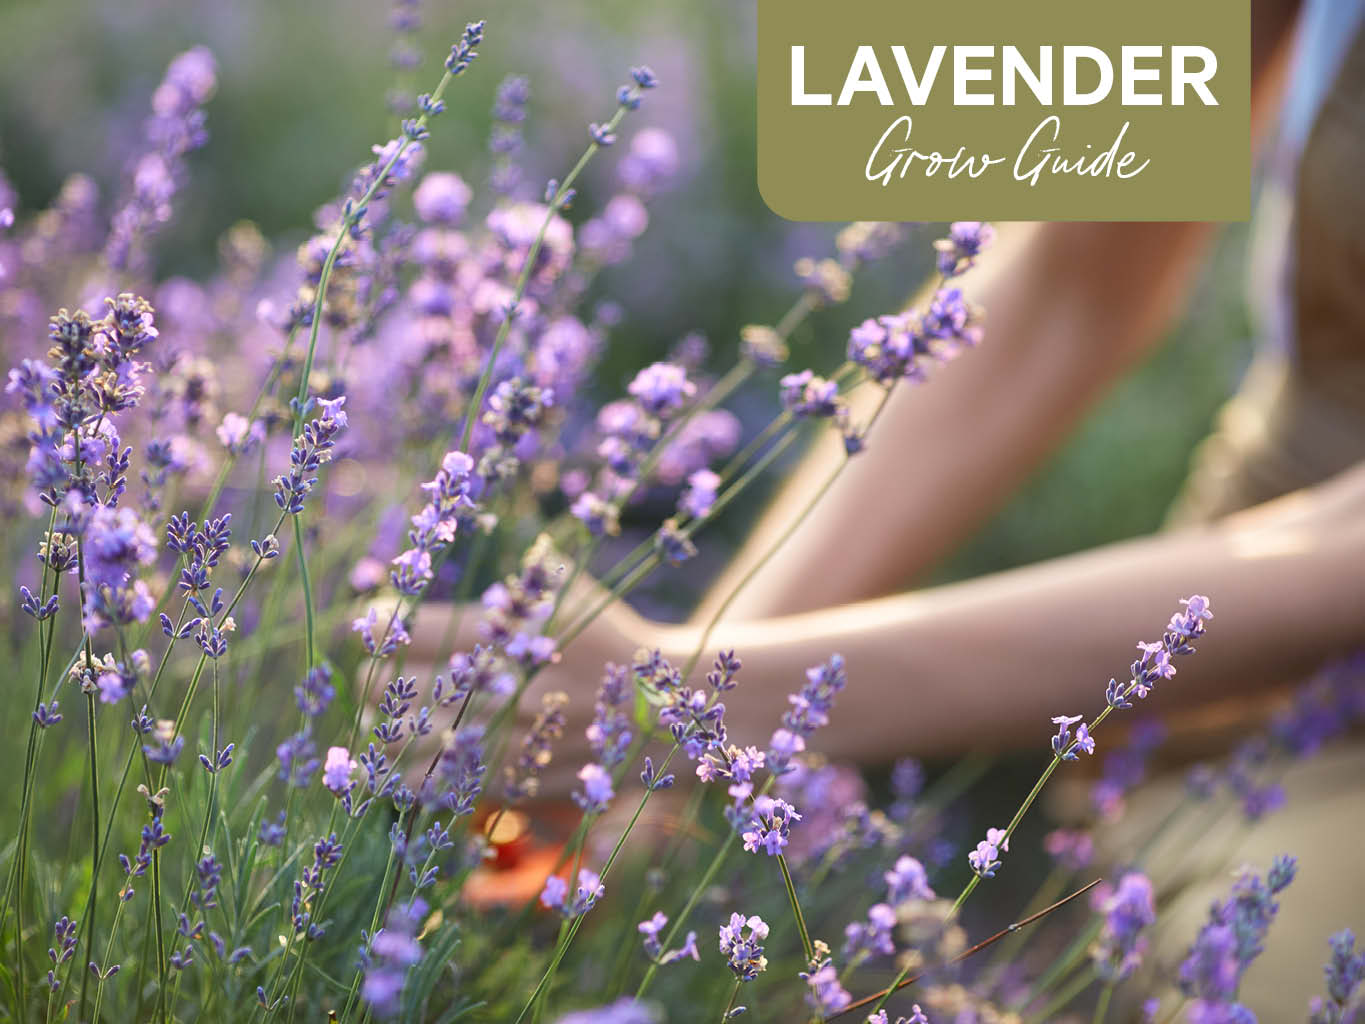 Lavender Grow Guide: How to Plant Grow and Harvest Lavender